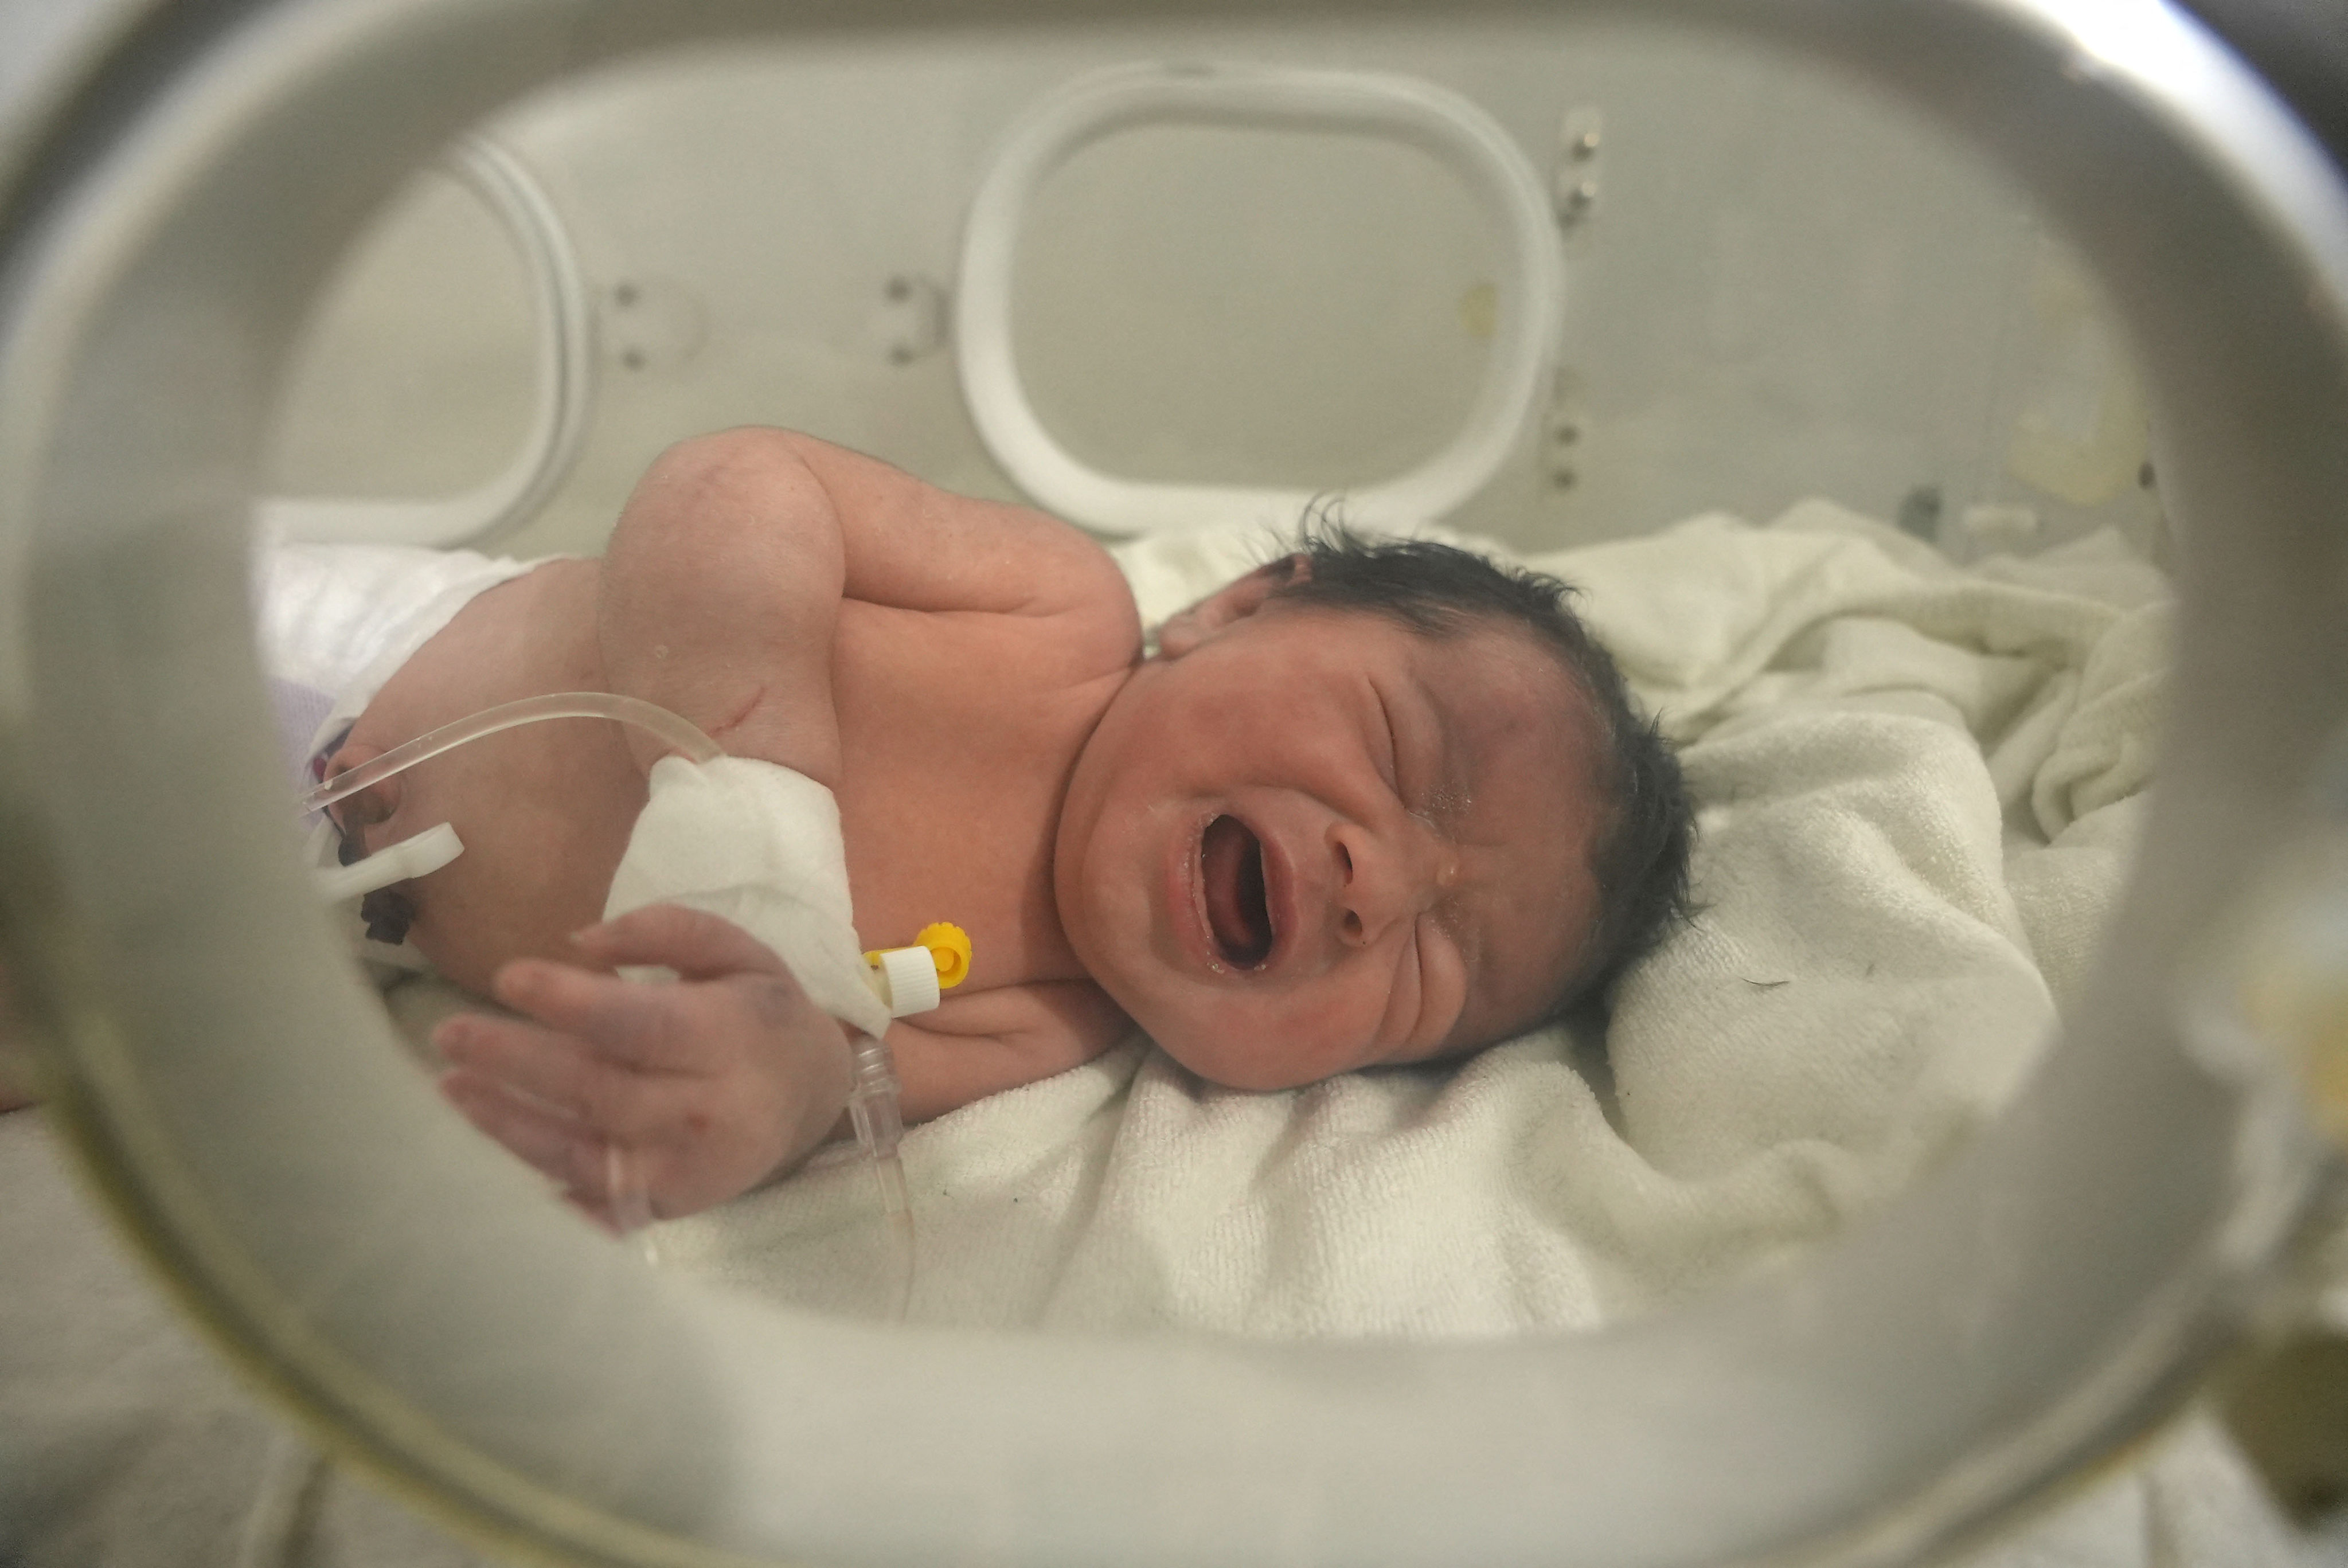 Newborn with umbilical cord intact is rescued from Syria rubble